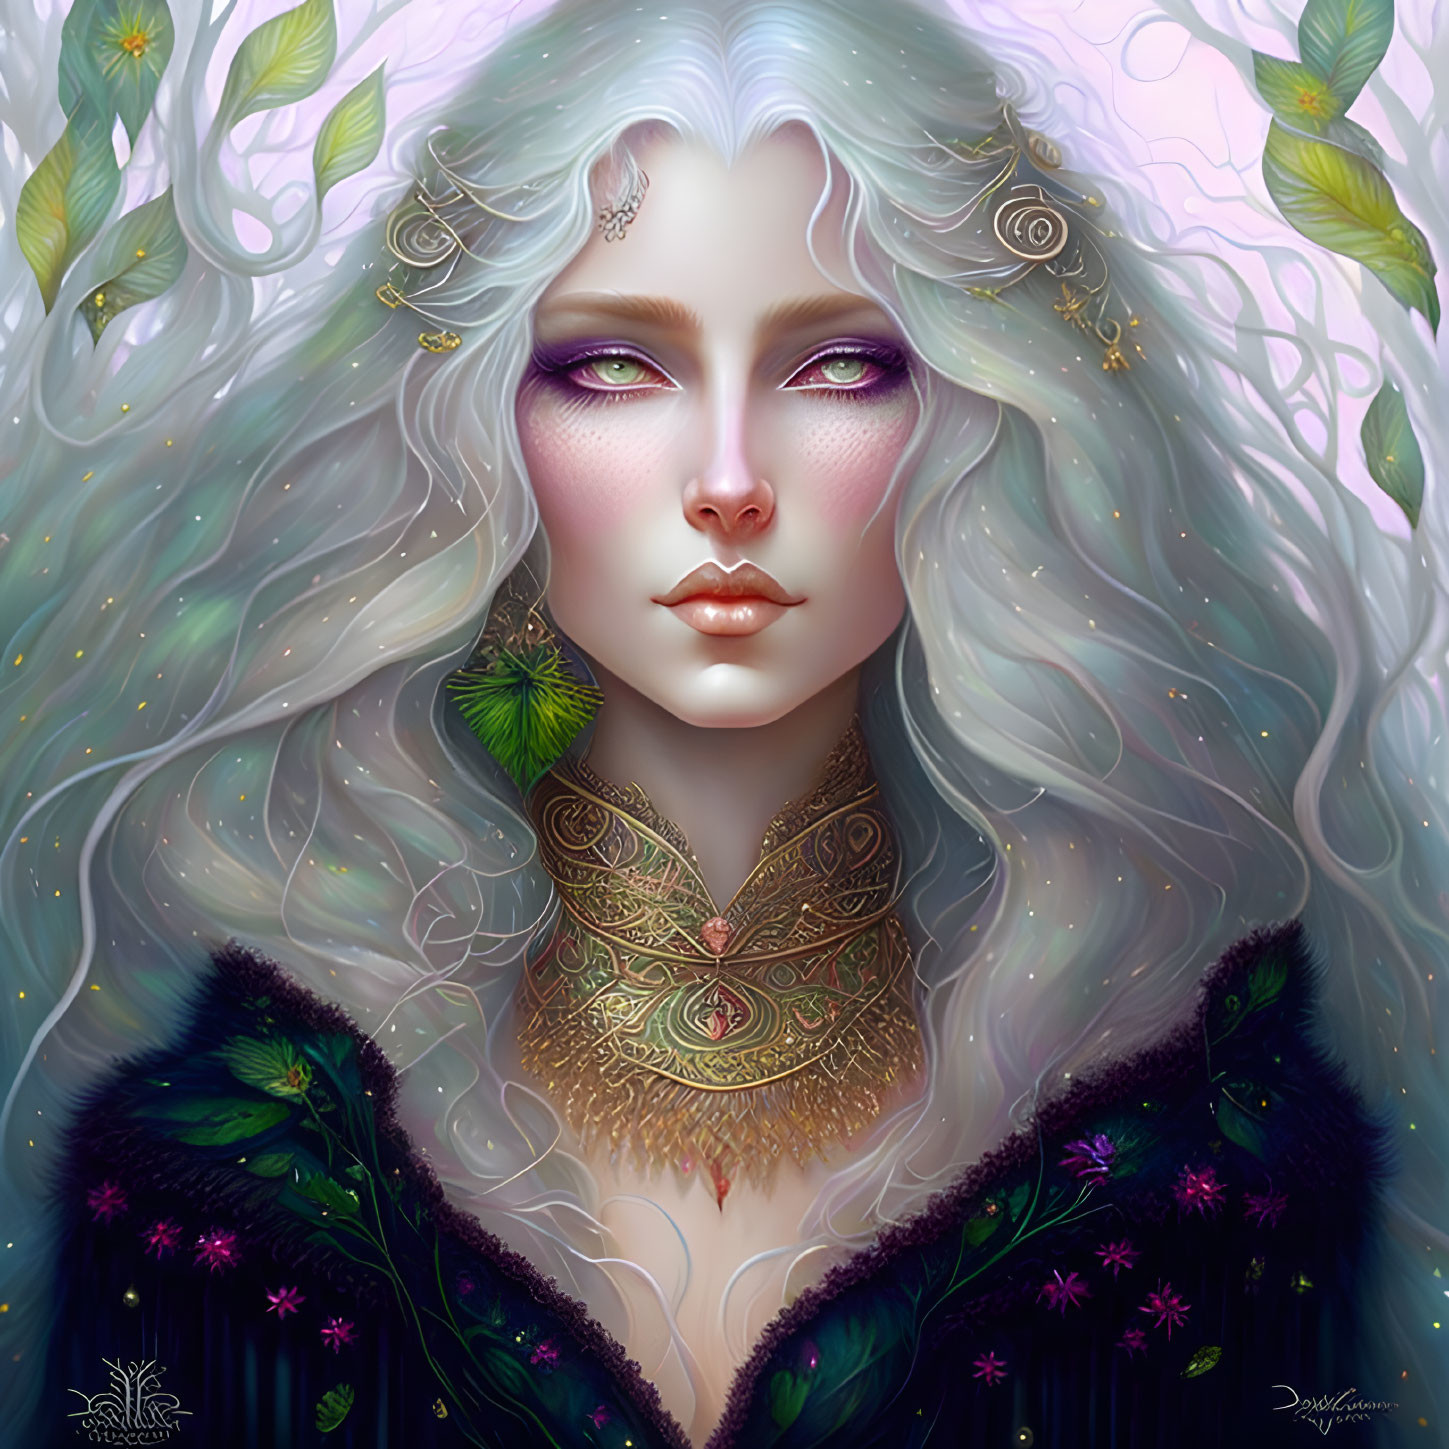 Fantasy digital portrait of female figure with white hair and purple eyes